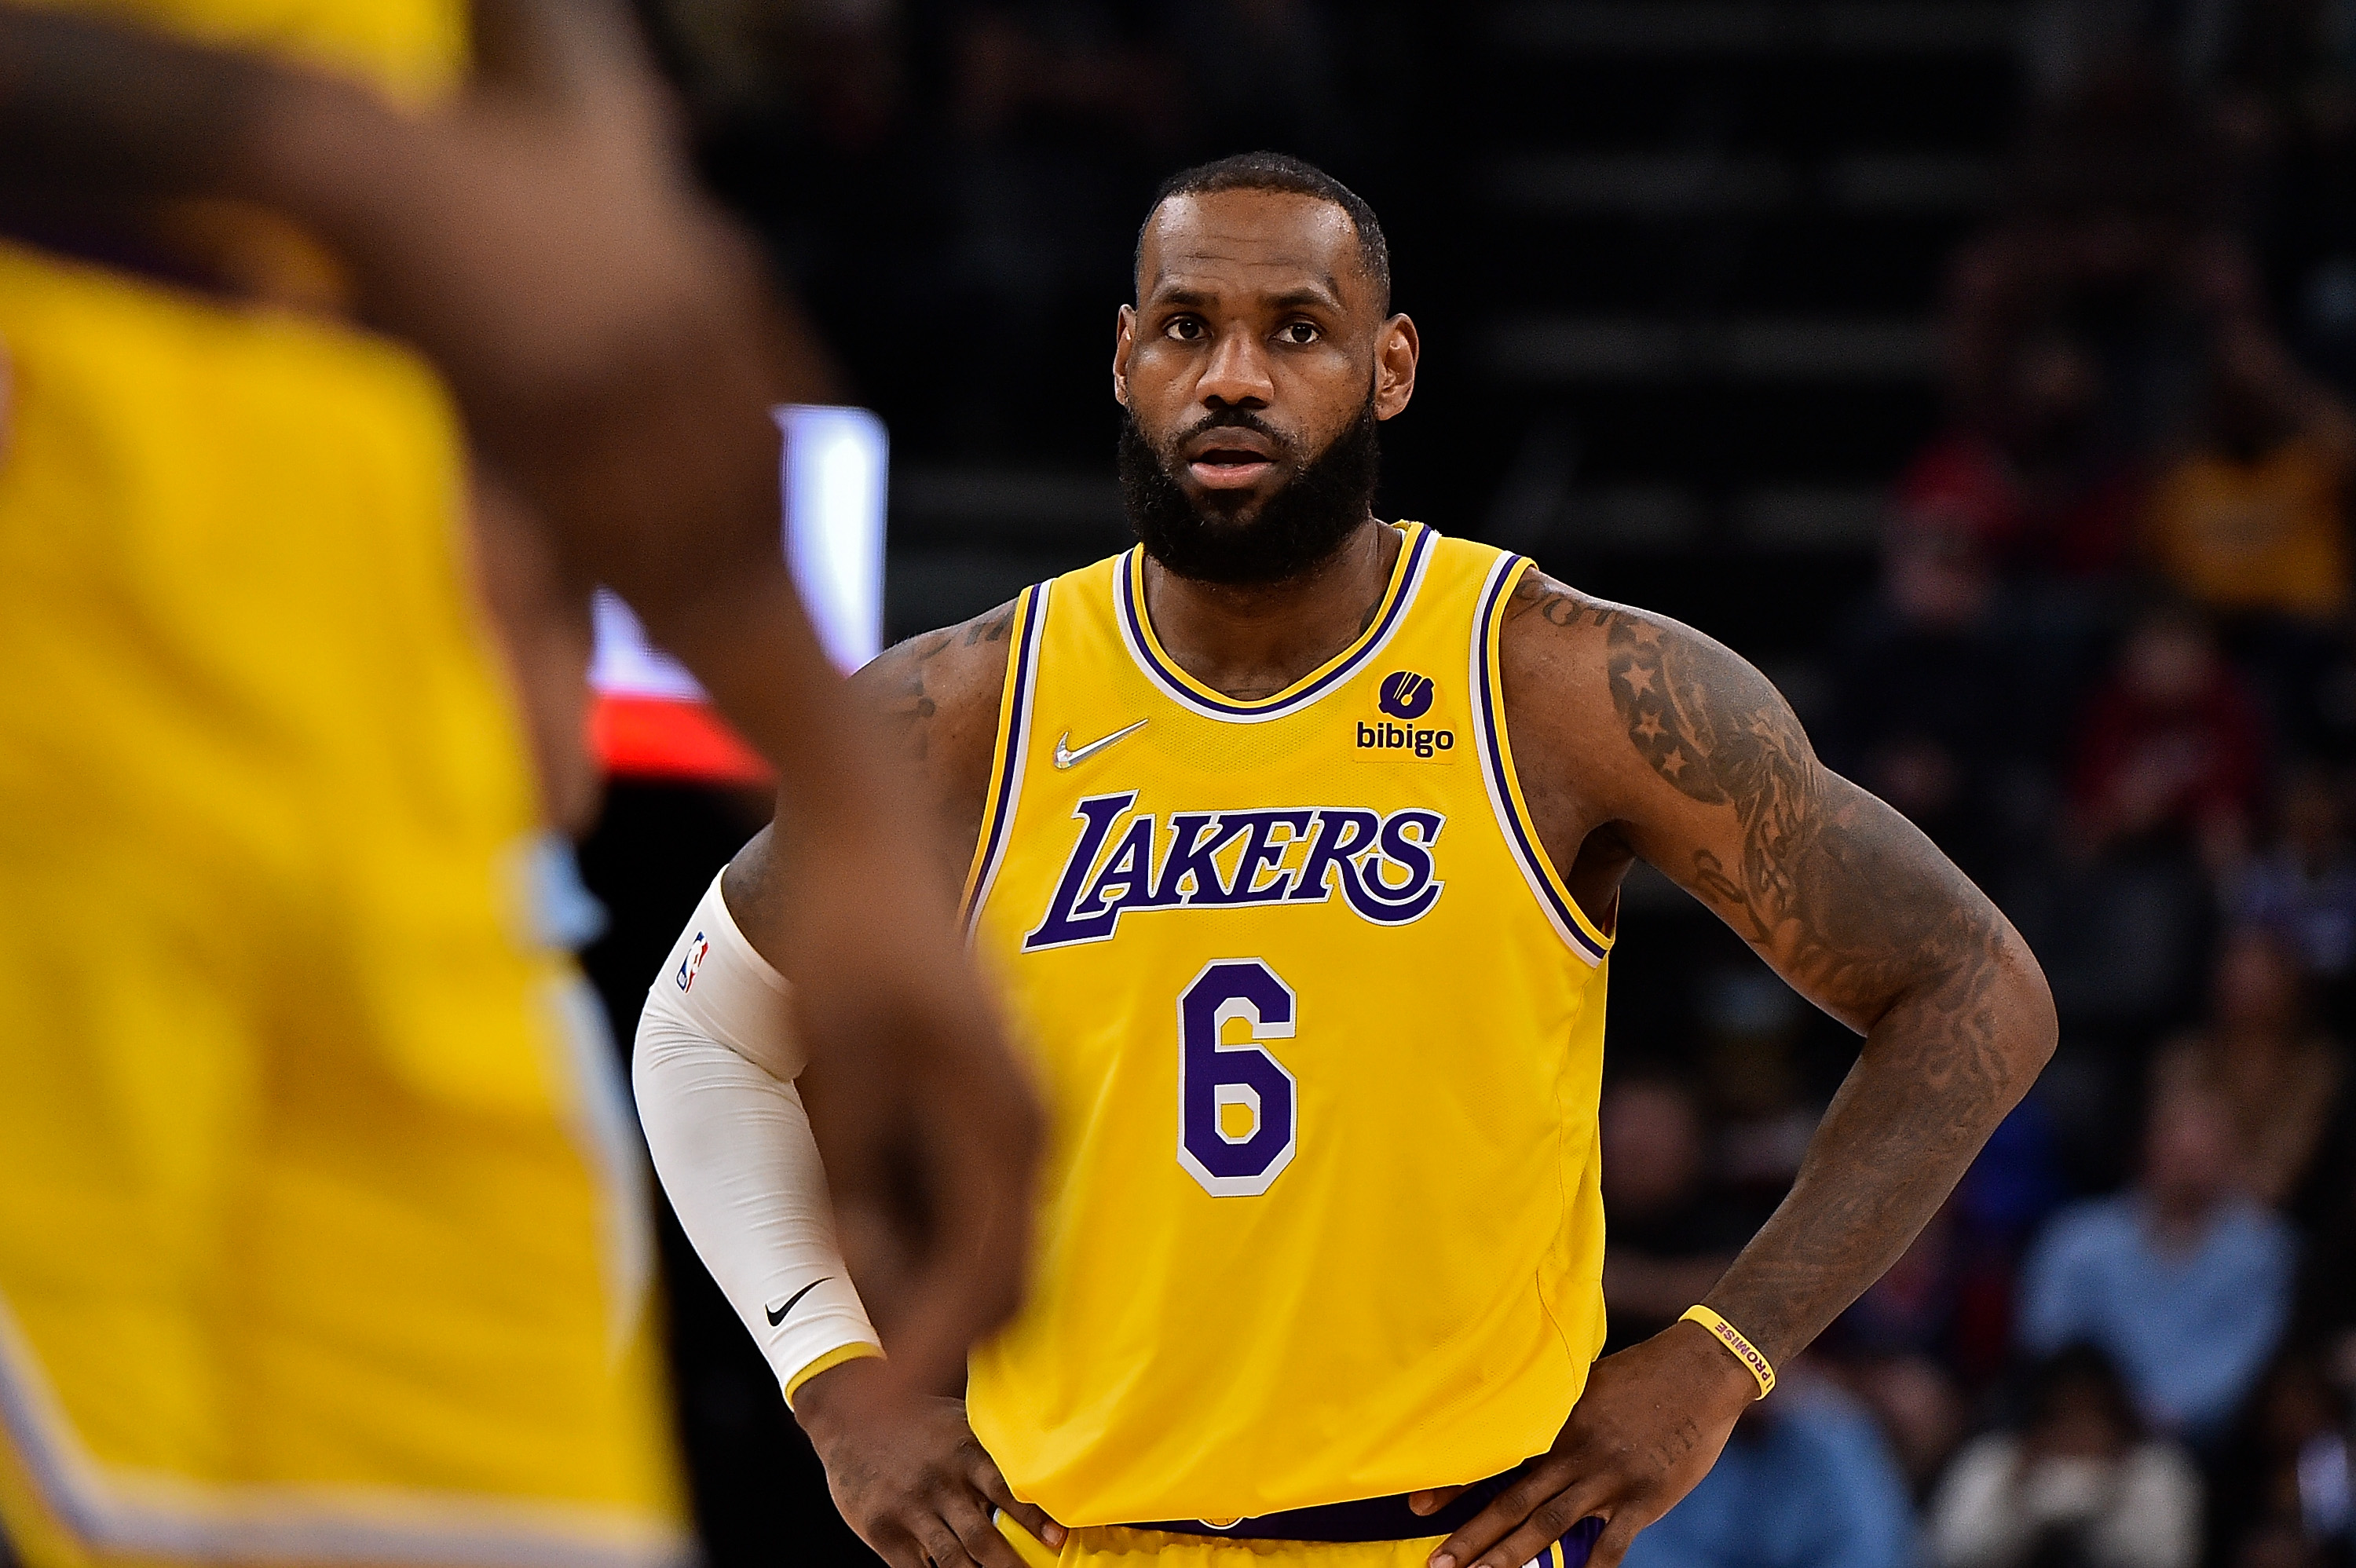 Los Angeles Lakers forward LeBron James #6 looks on during the first half against the Memphis Grizzlies at FedExForum on December 29, 2021 in Memphis, Tennessee.